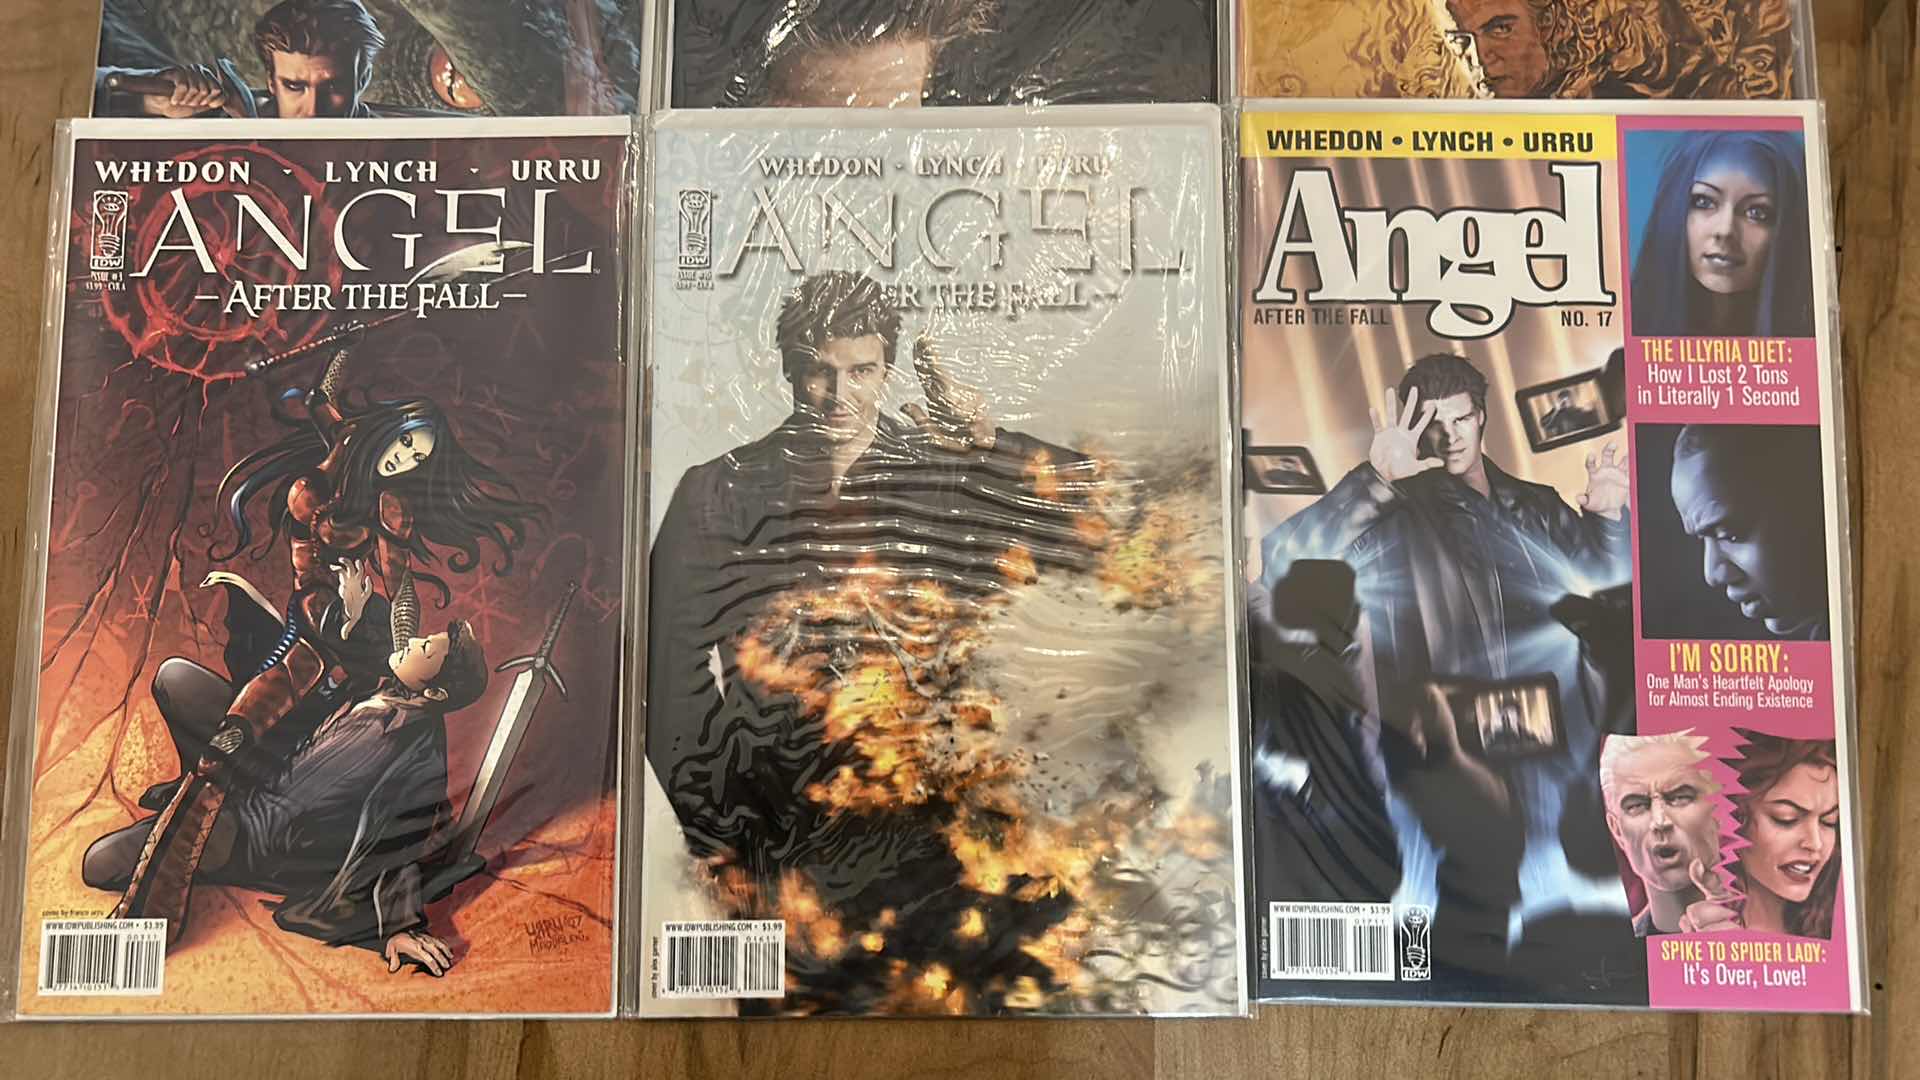 Photo 2 of 9 - ANGEL AFTER THE FALL COMIC BOOKS